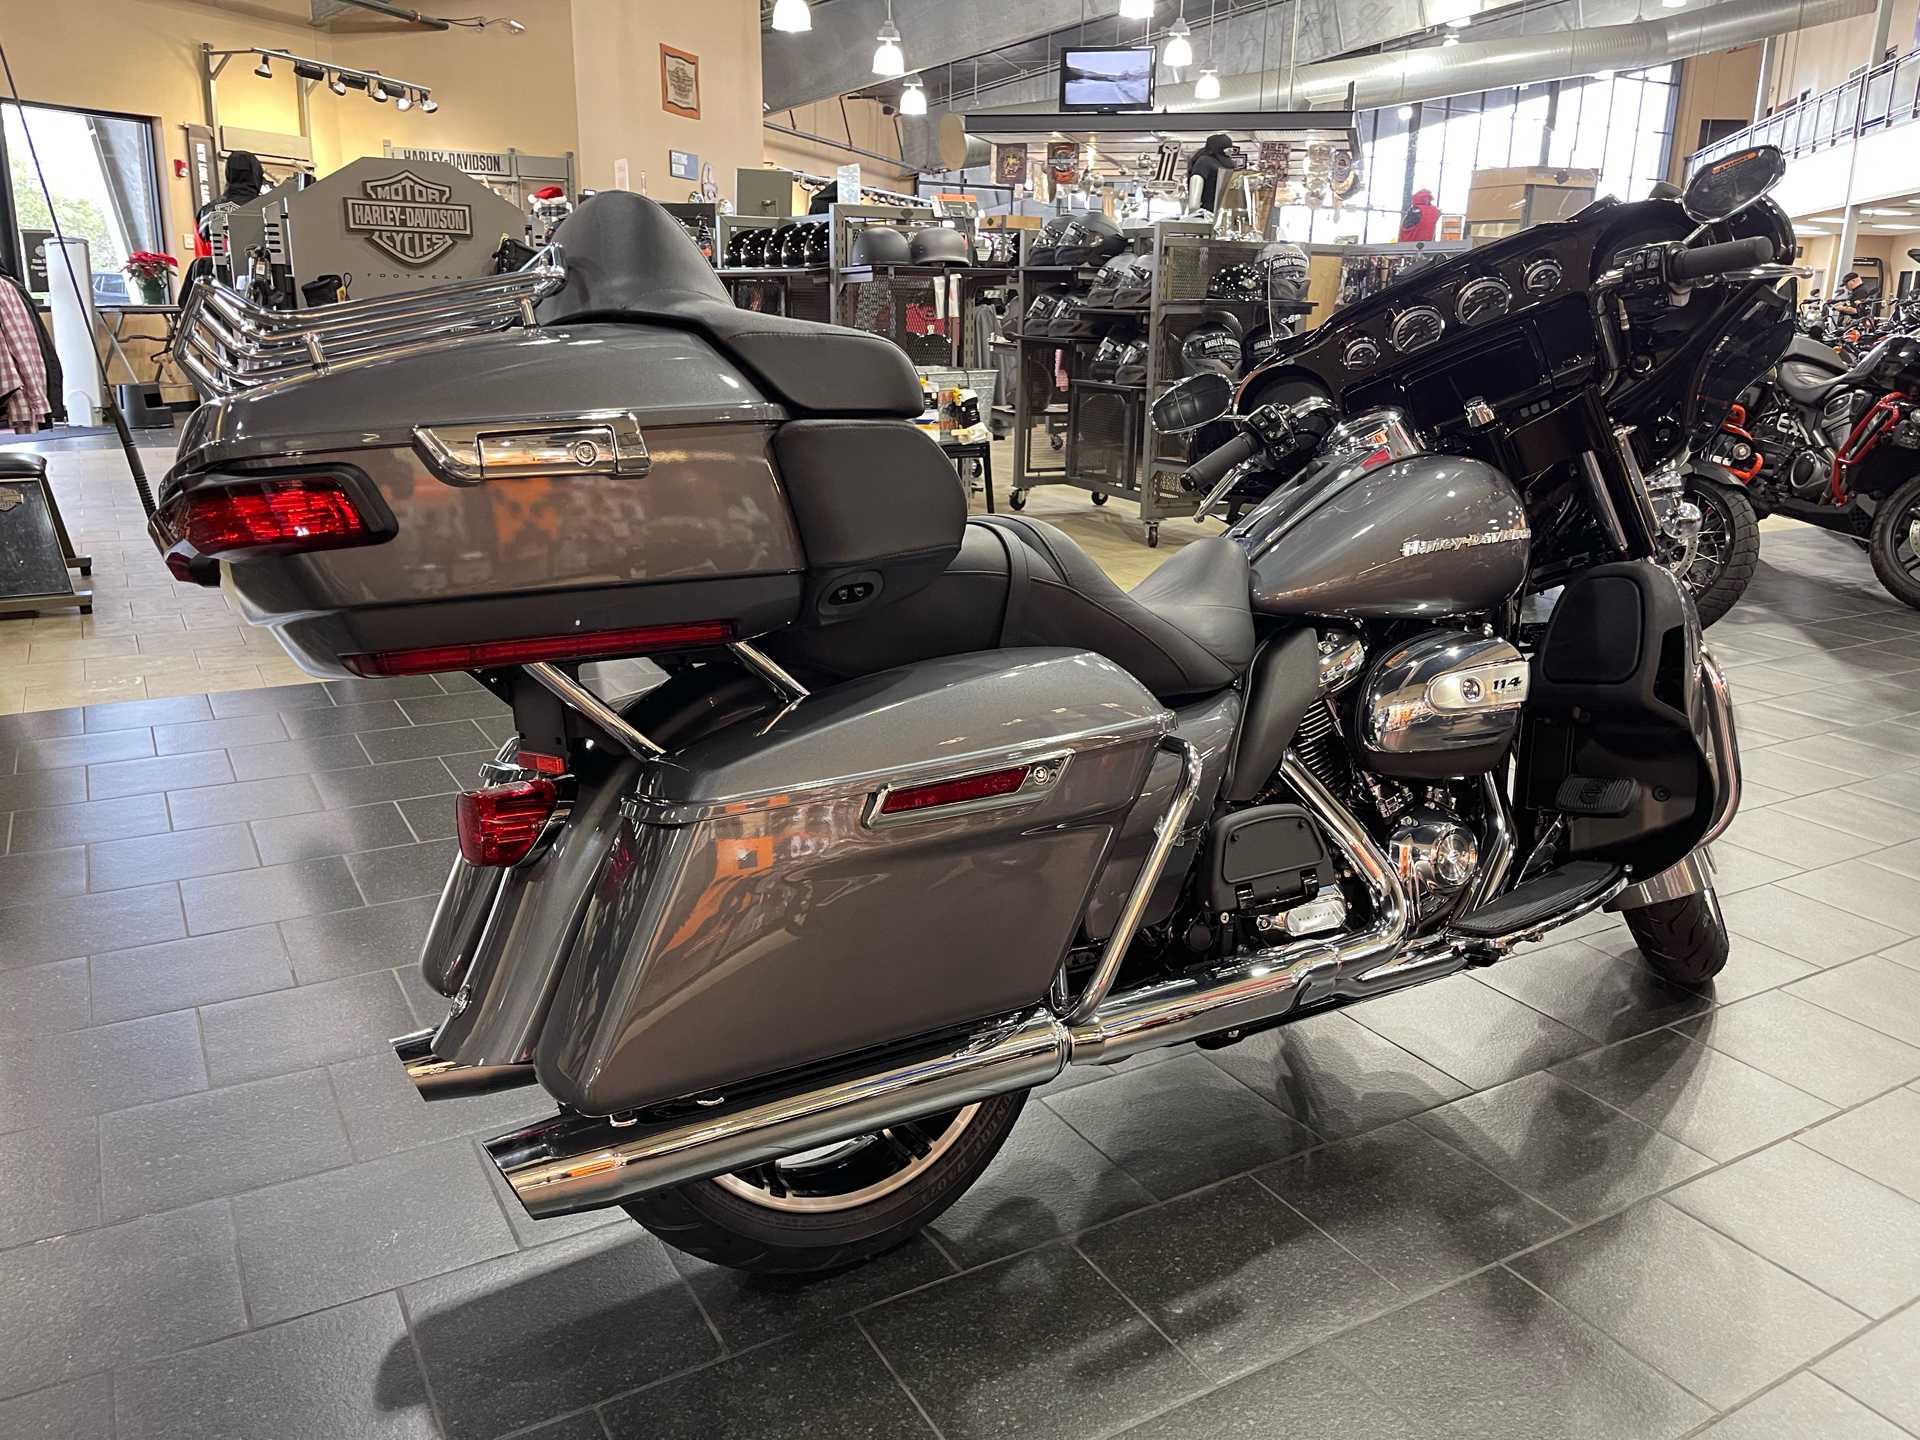 2022 Harley-Davidson Ultra Limited in The Woodlands, Texas - Photo 7